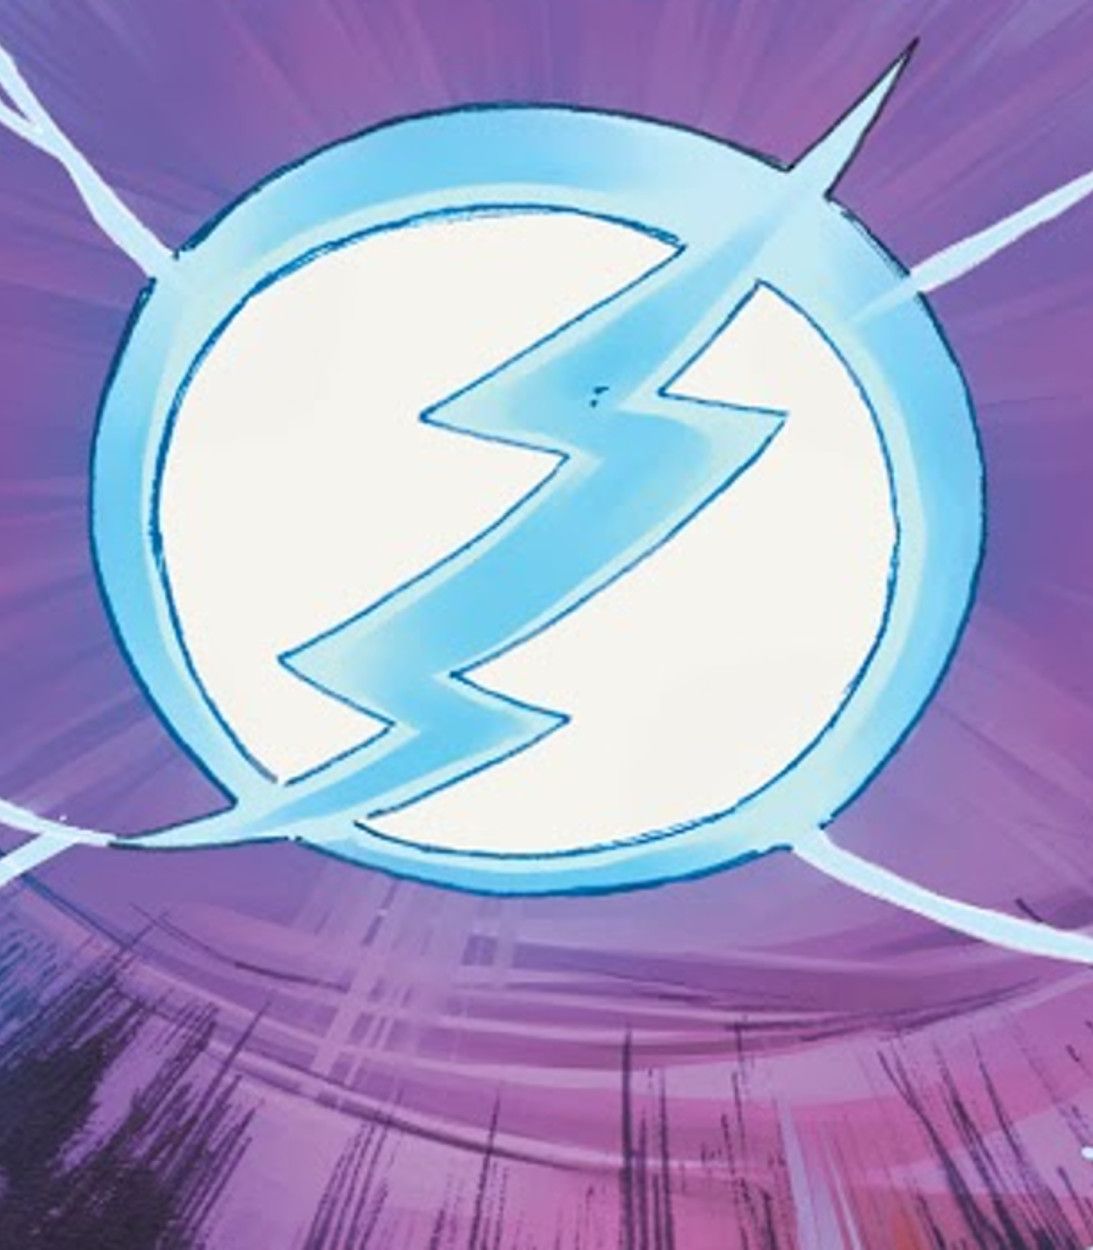 The Flash symbol with blue lightning vertical